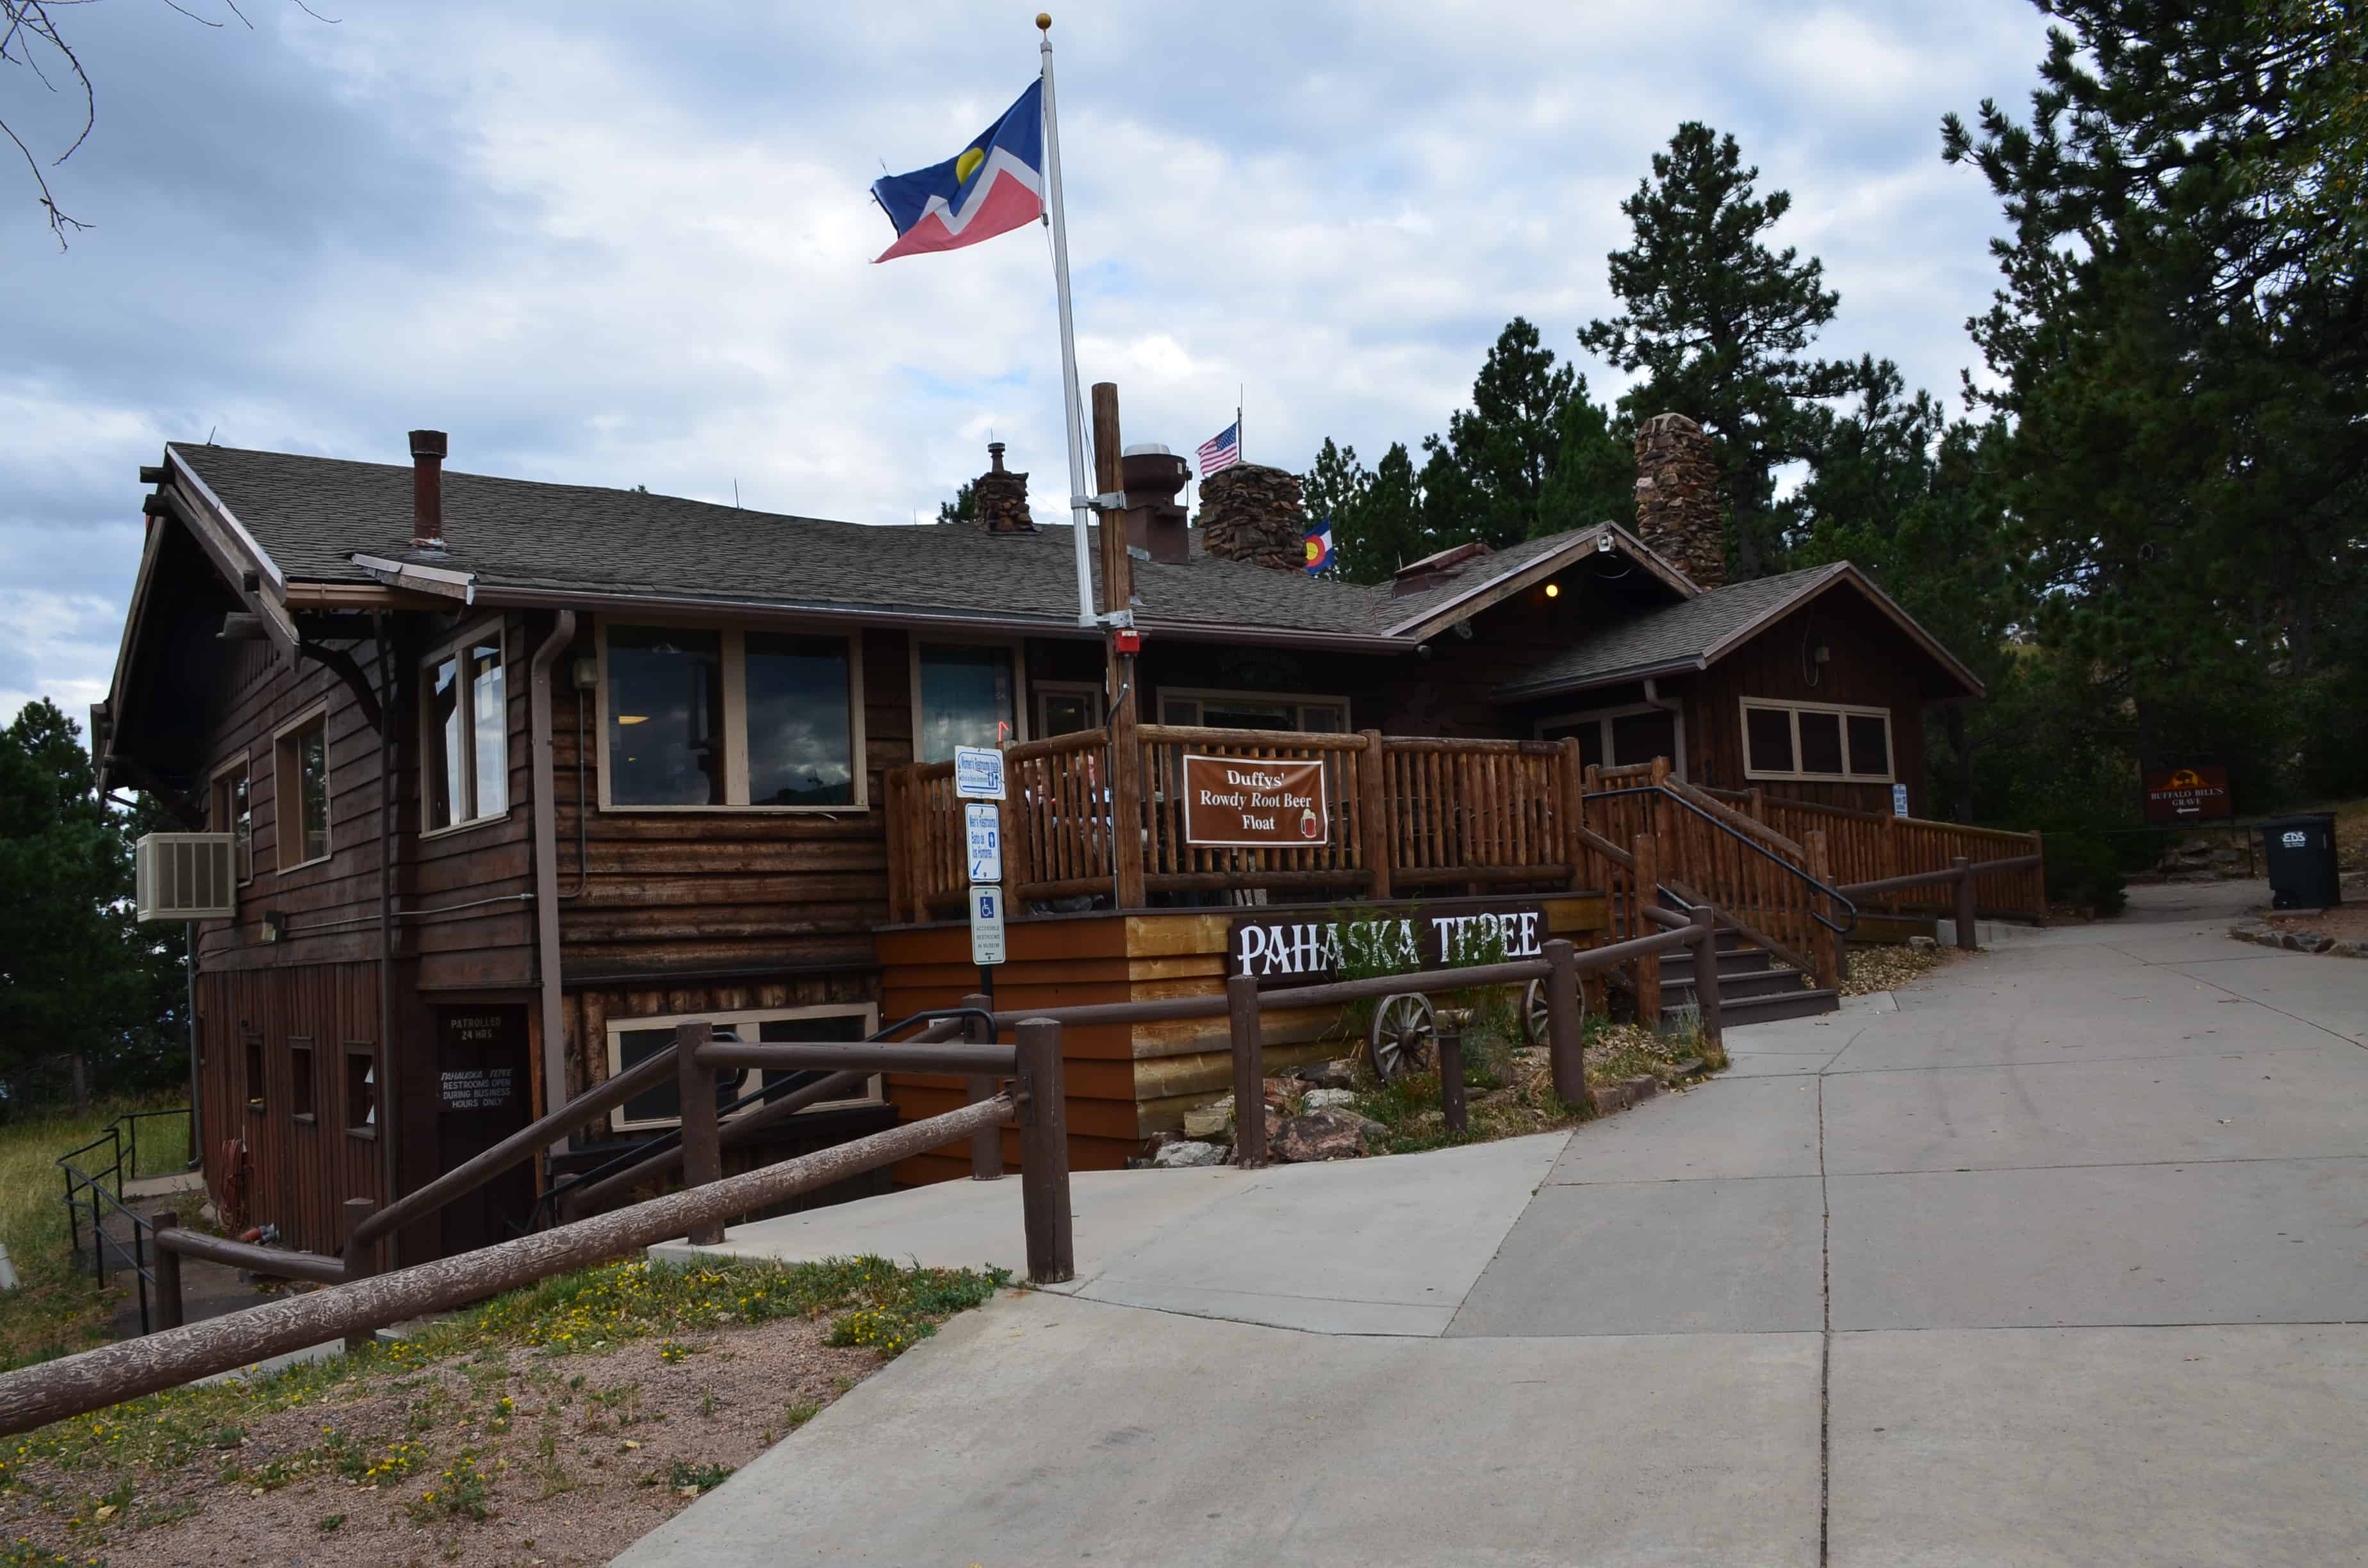 Pahaska Tepee gift shop on Lookout Mountain along the Lariat Loop National Scenic Byway in Colorado